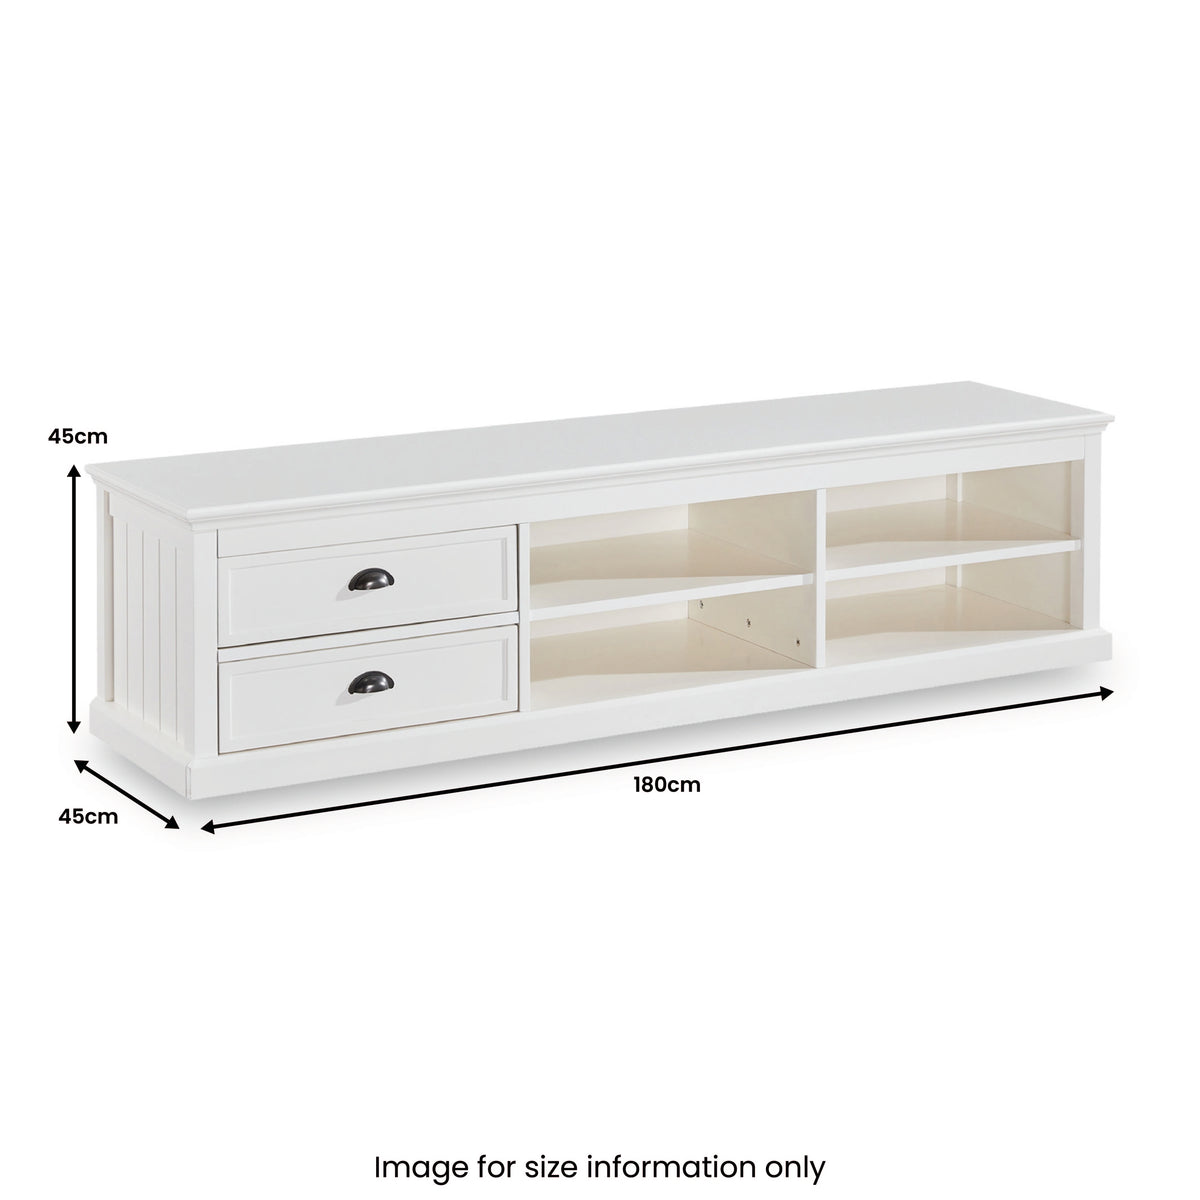 Leighton White 180cm Extra Wide TV Unit from Roseland Furniture